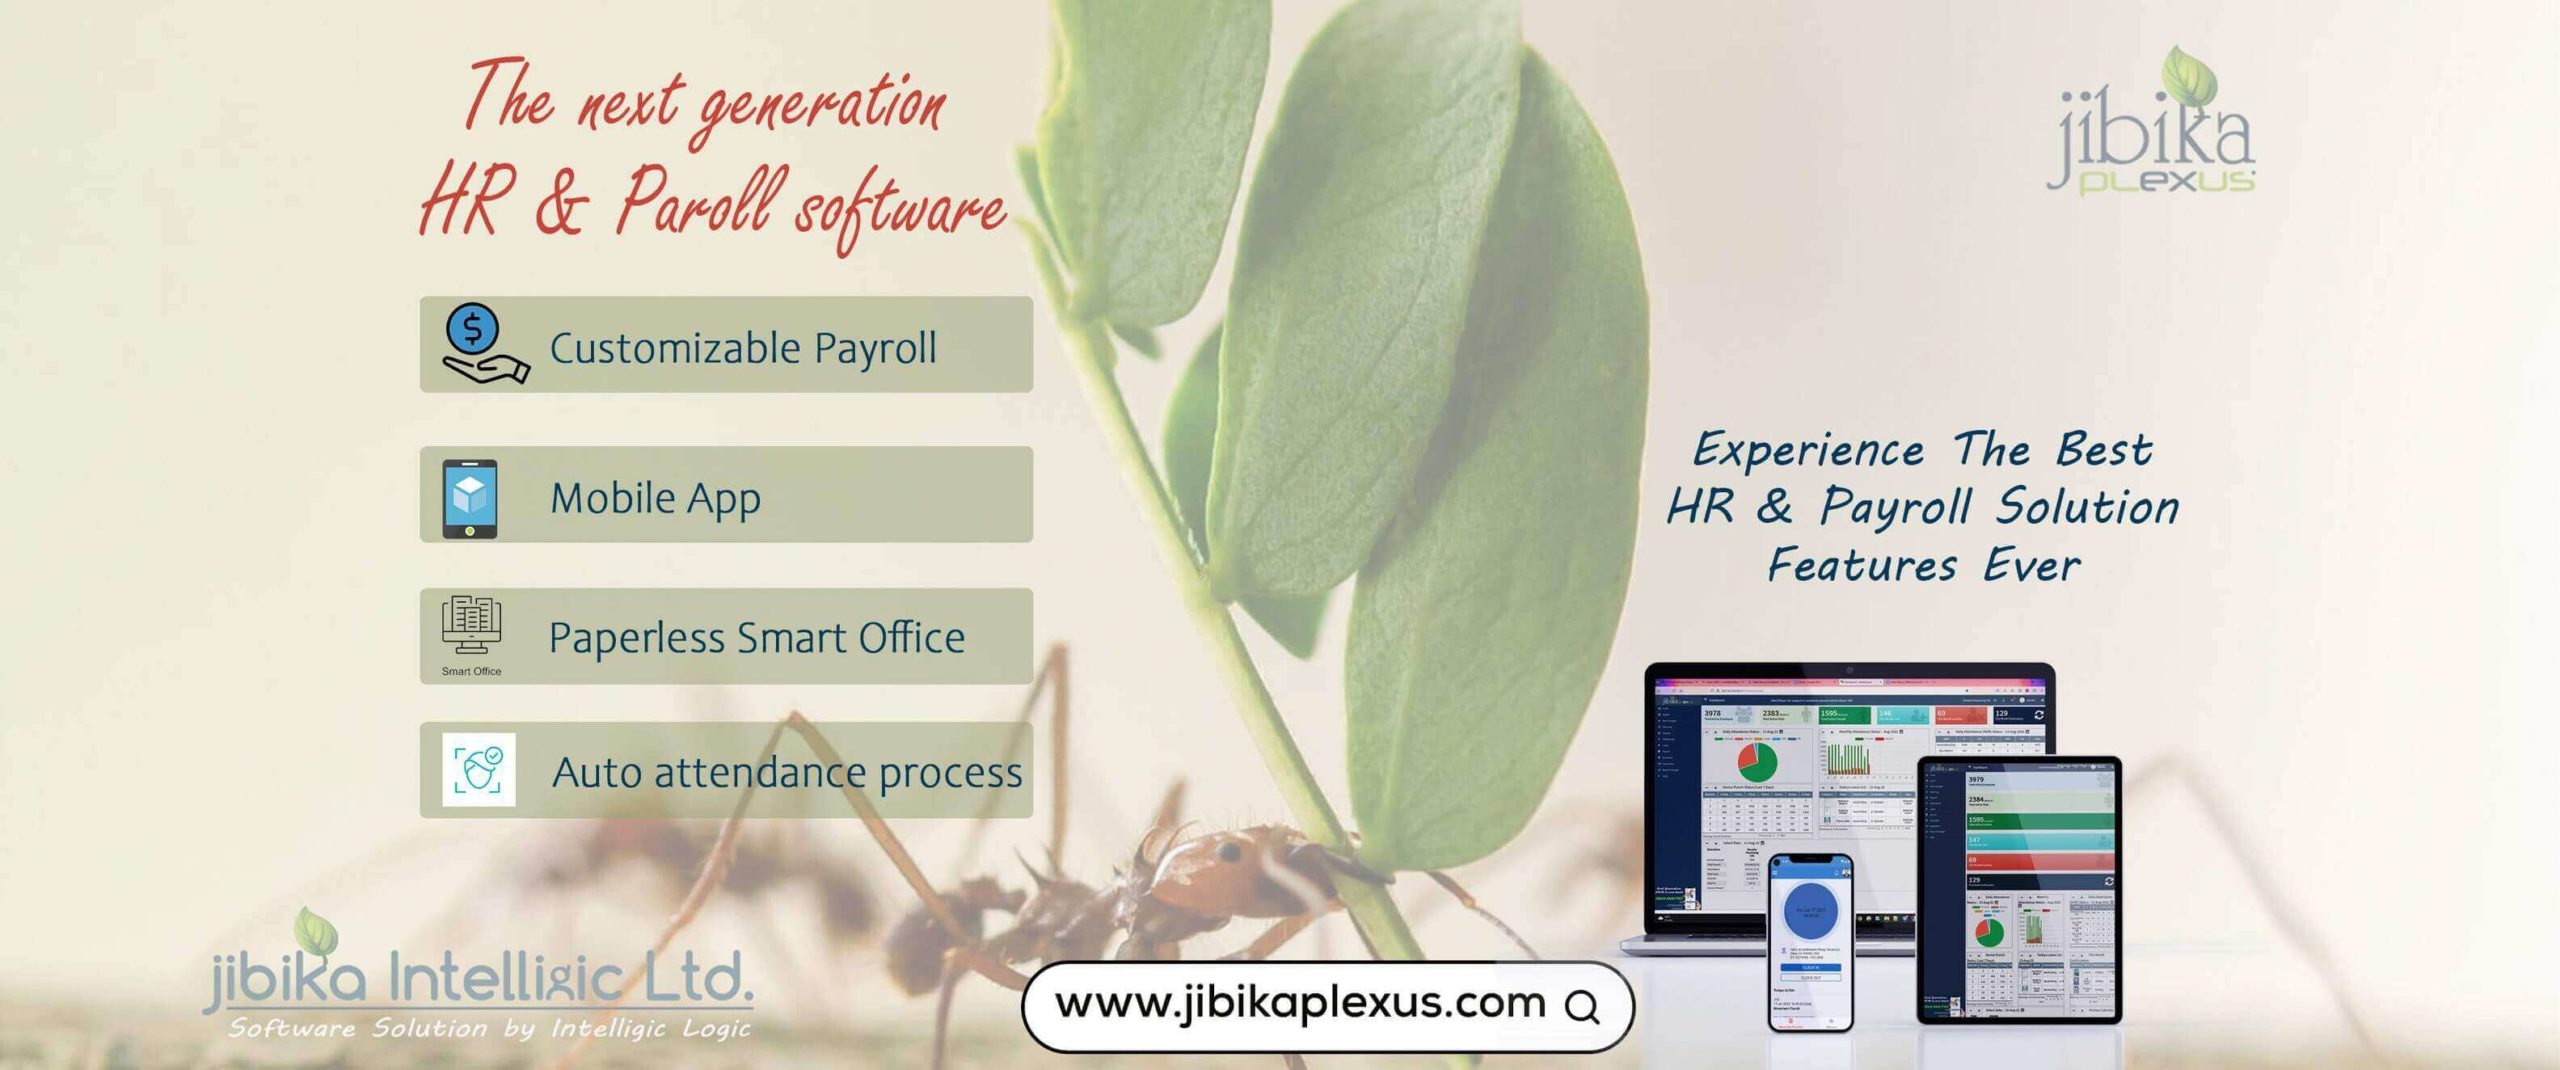 Advantages and disadvantages of Payroll Software